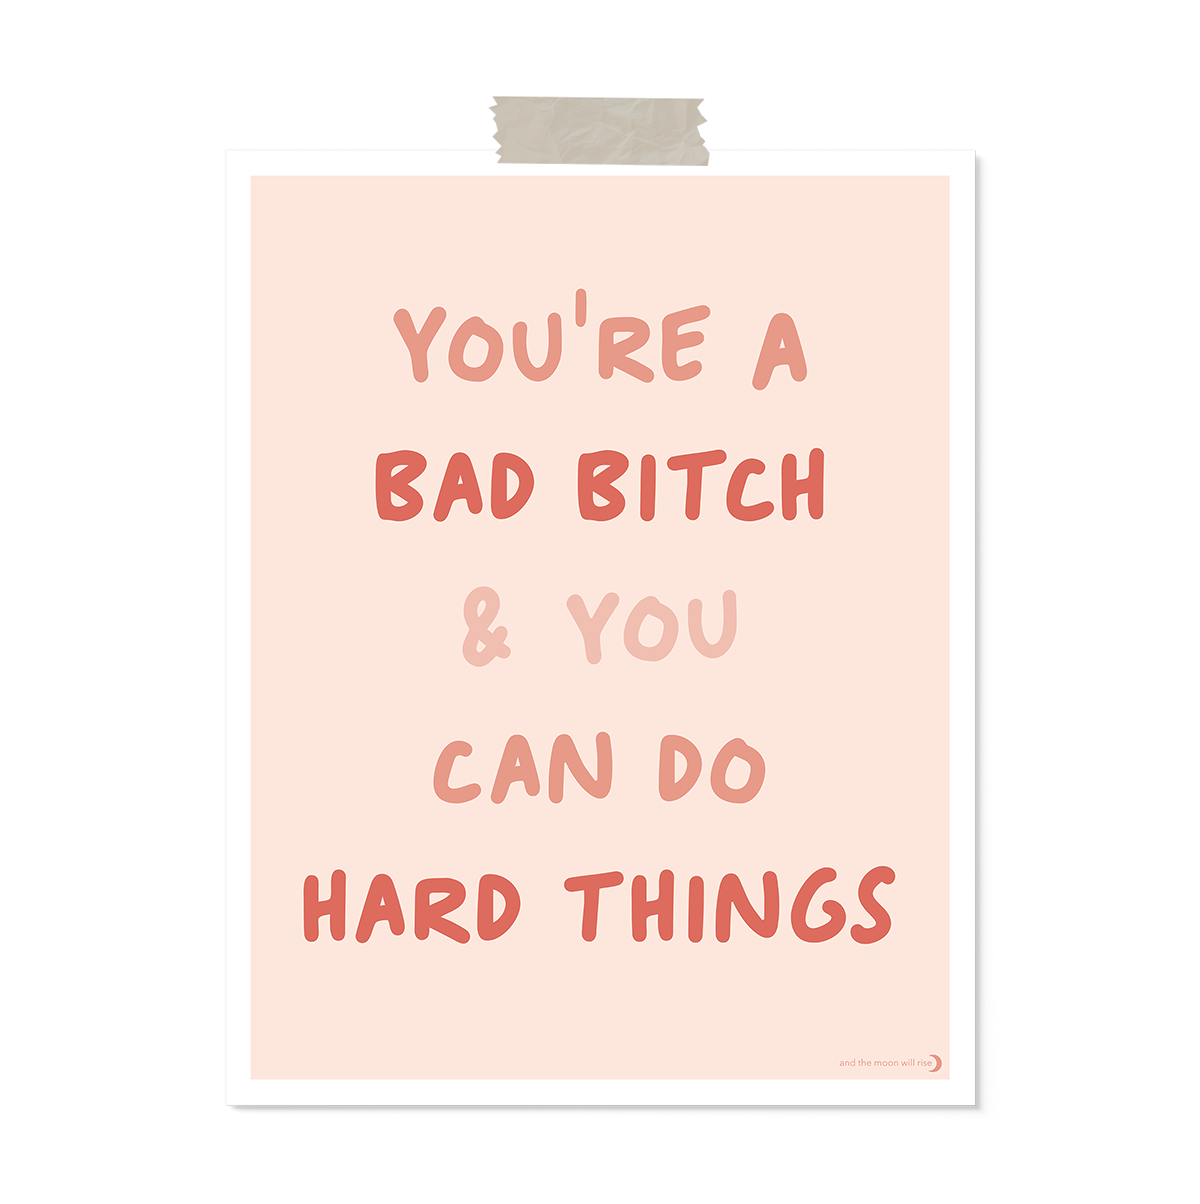 11x14 vertical art print with "you're a bad bitch & you can do hard things" in shades of coral and pink on blush background with white border